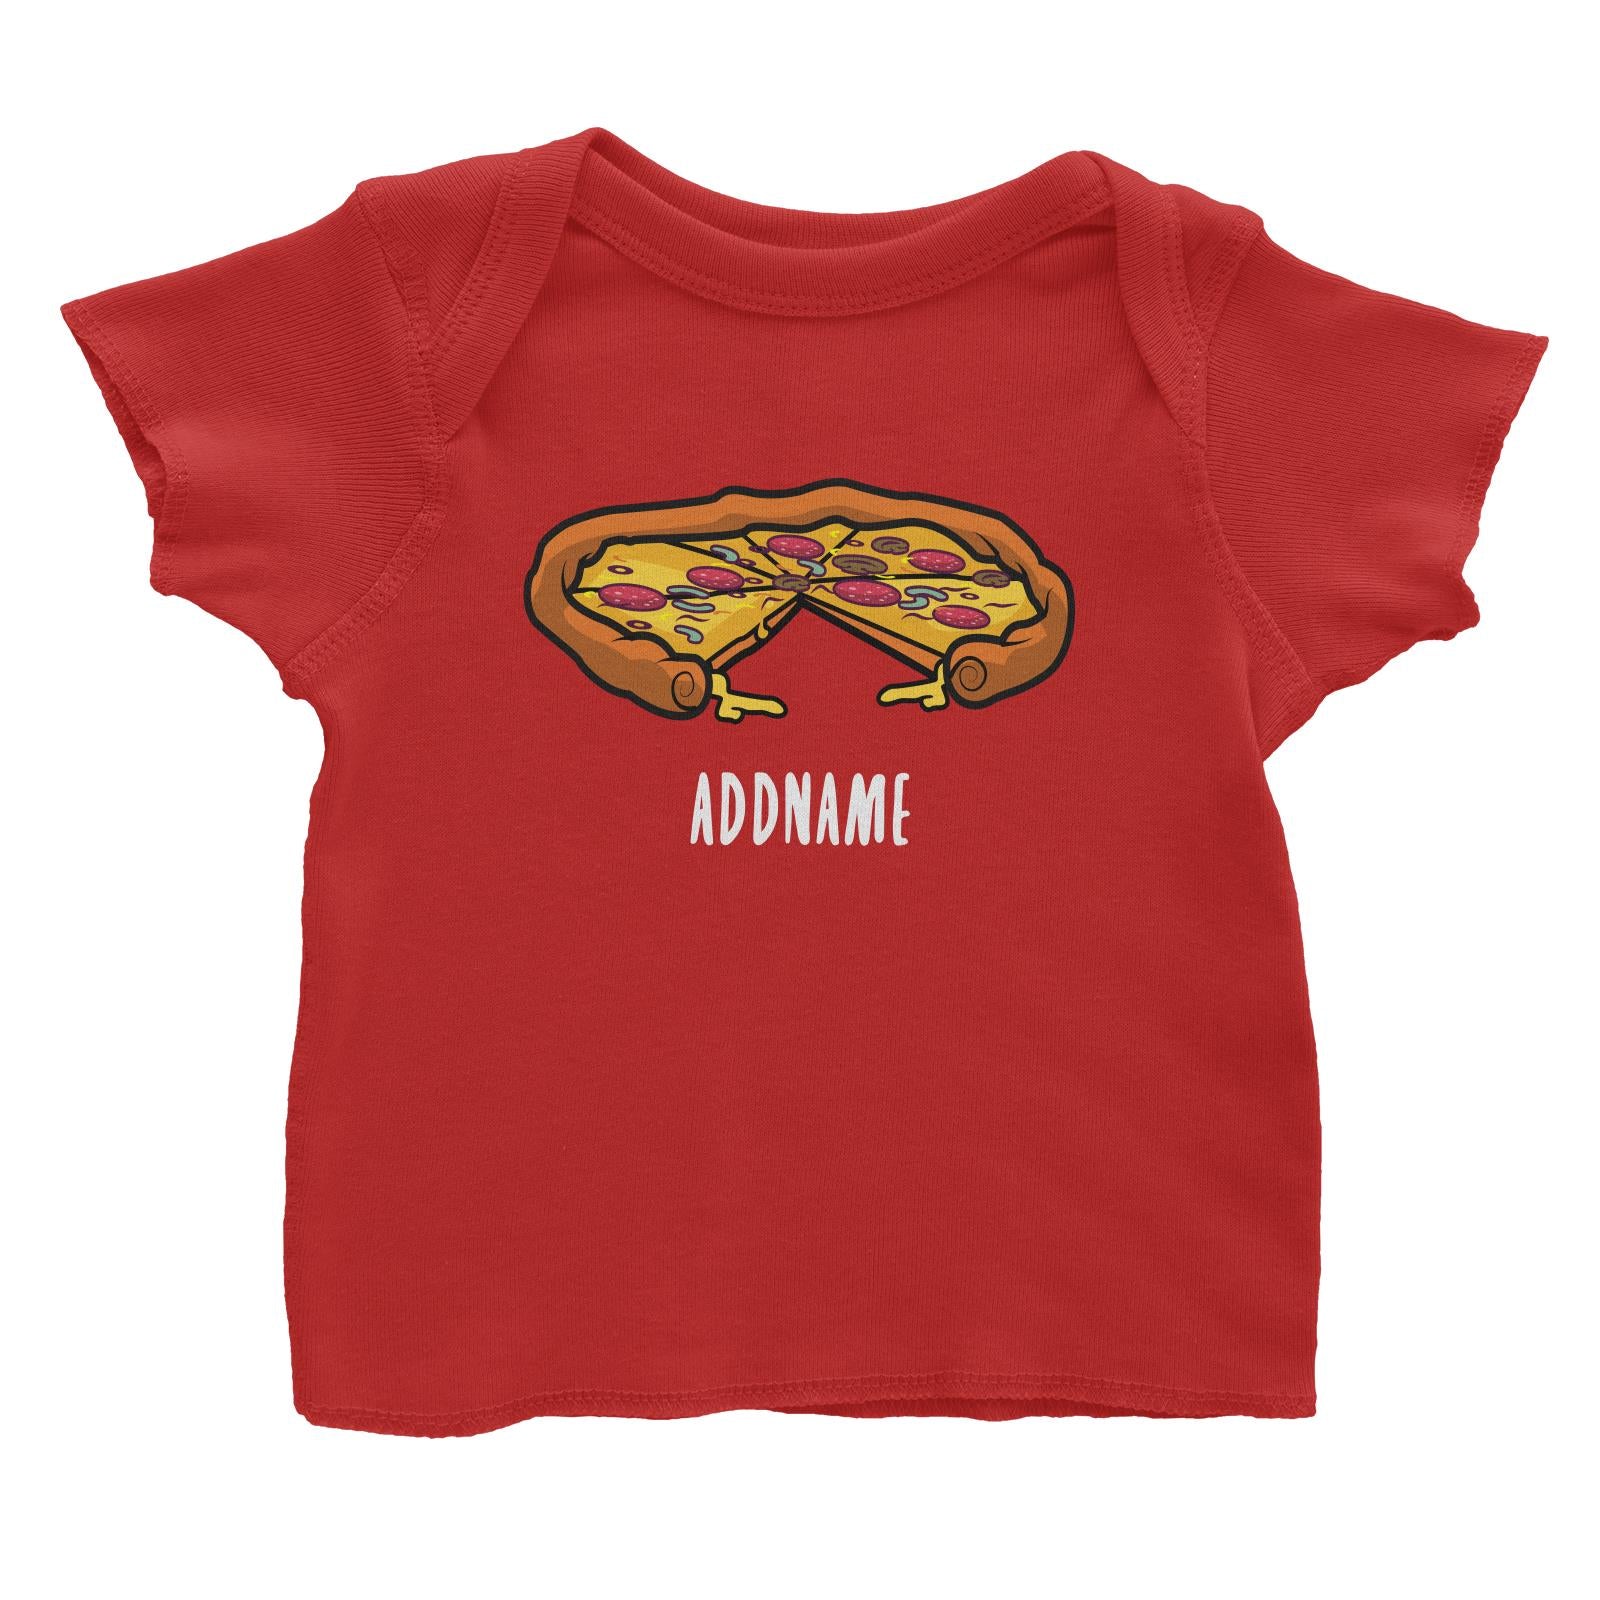 Fast Food Whole Pizza with A Slice Taken Out Addname Baby T-Shirt  Matching Family Comic Cartoon Personalizable Designs